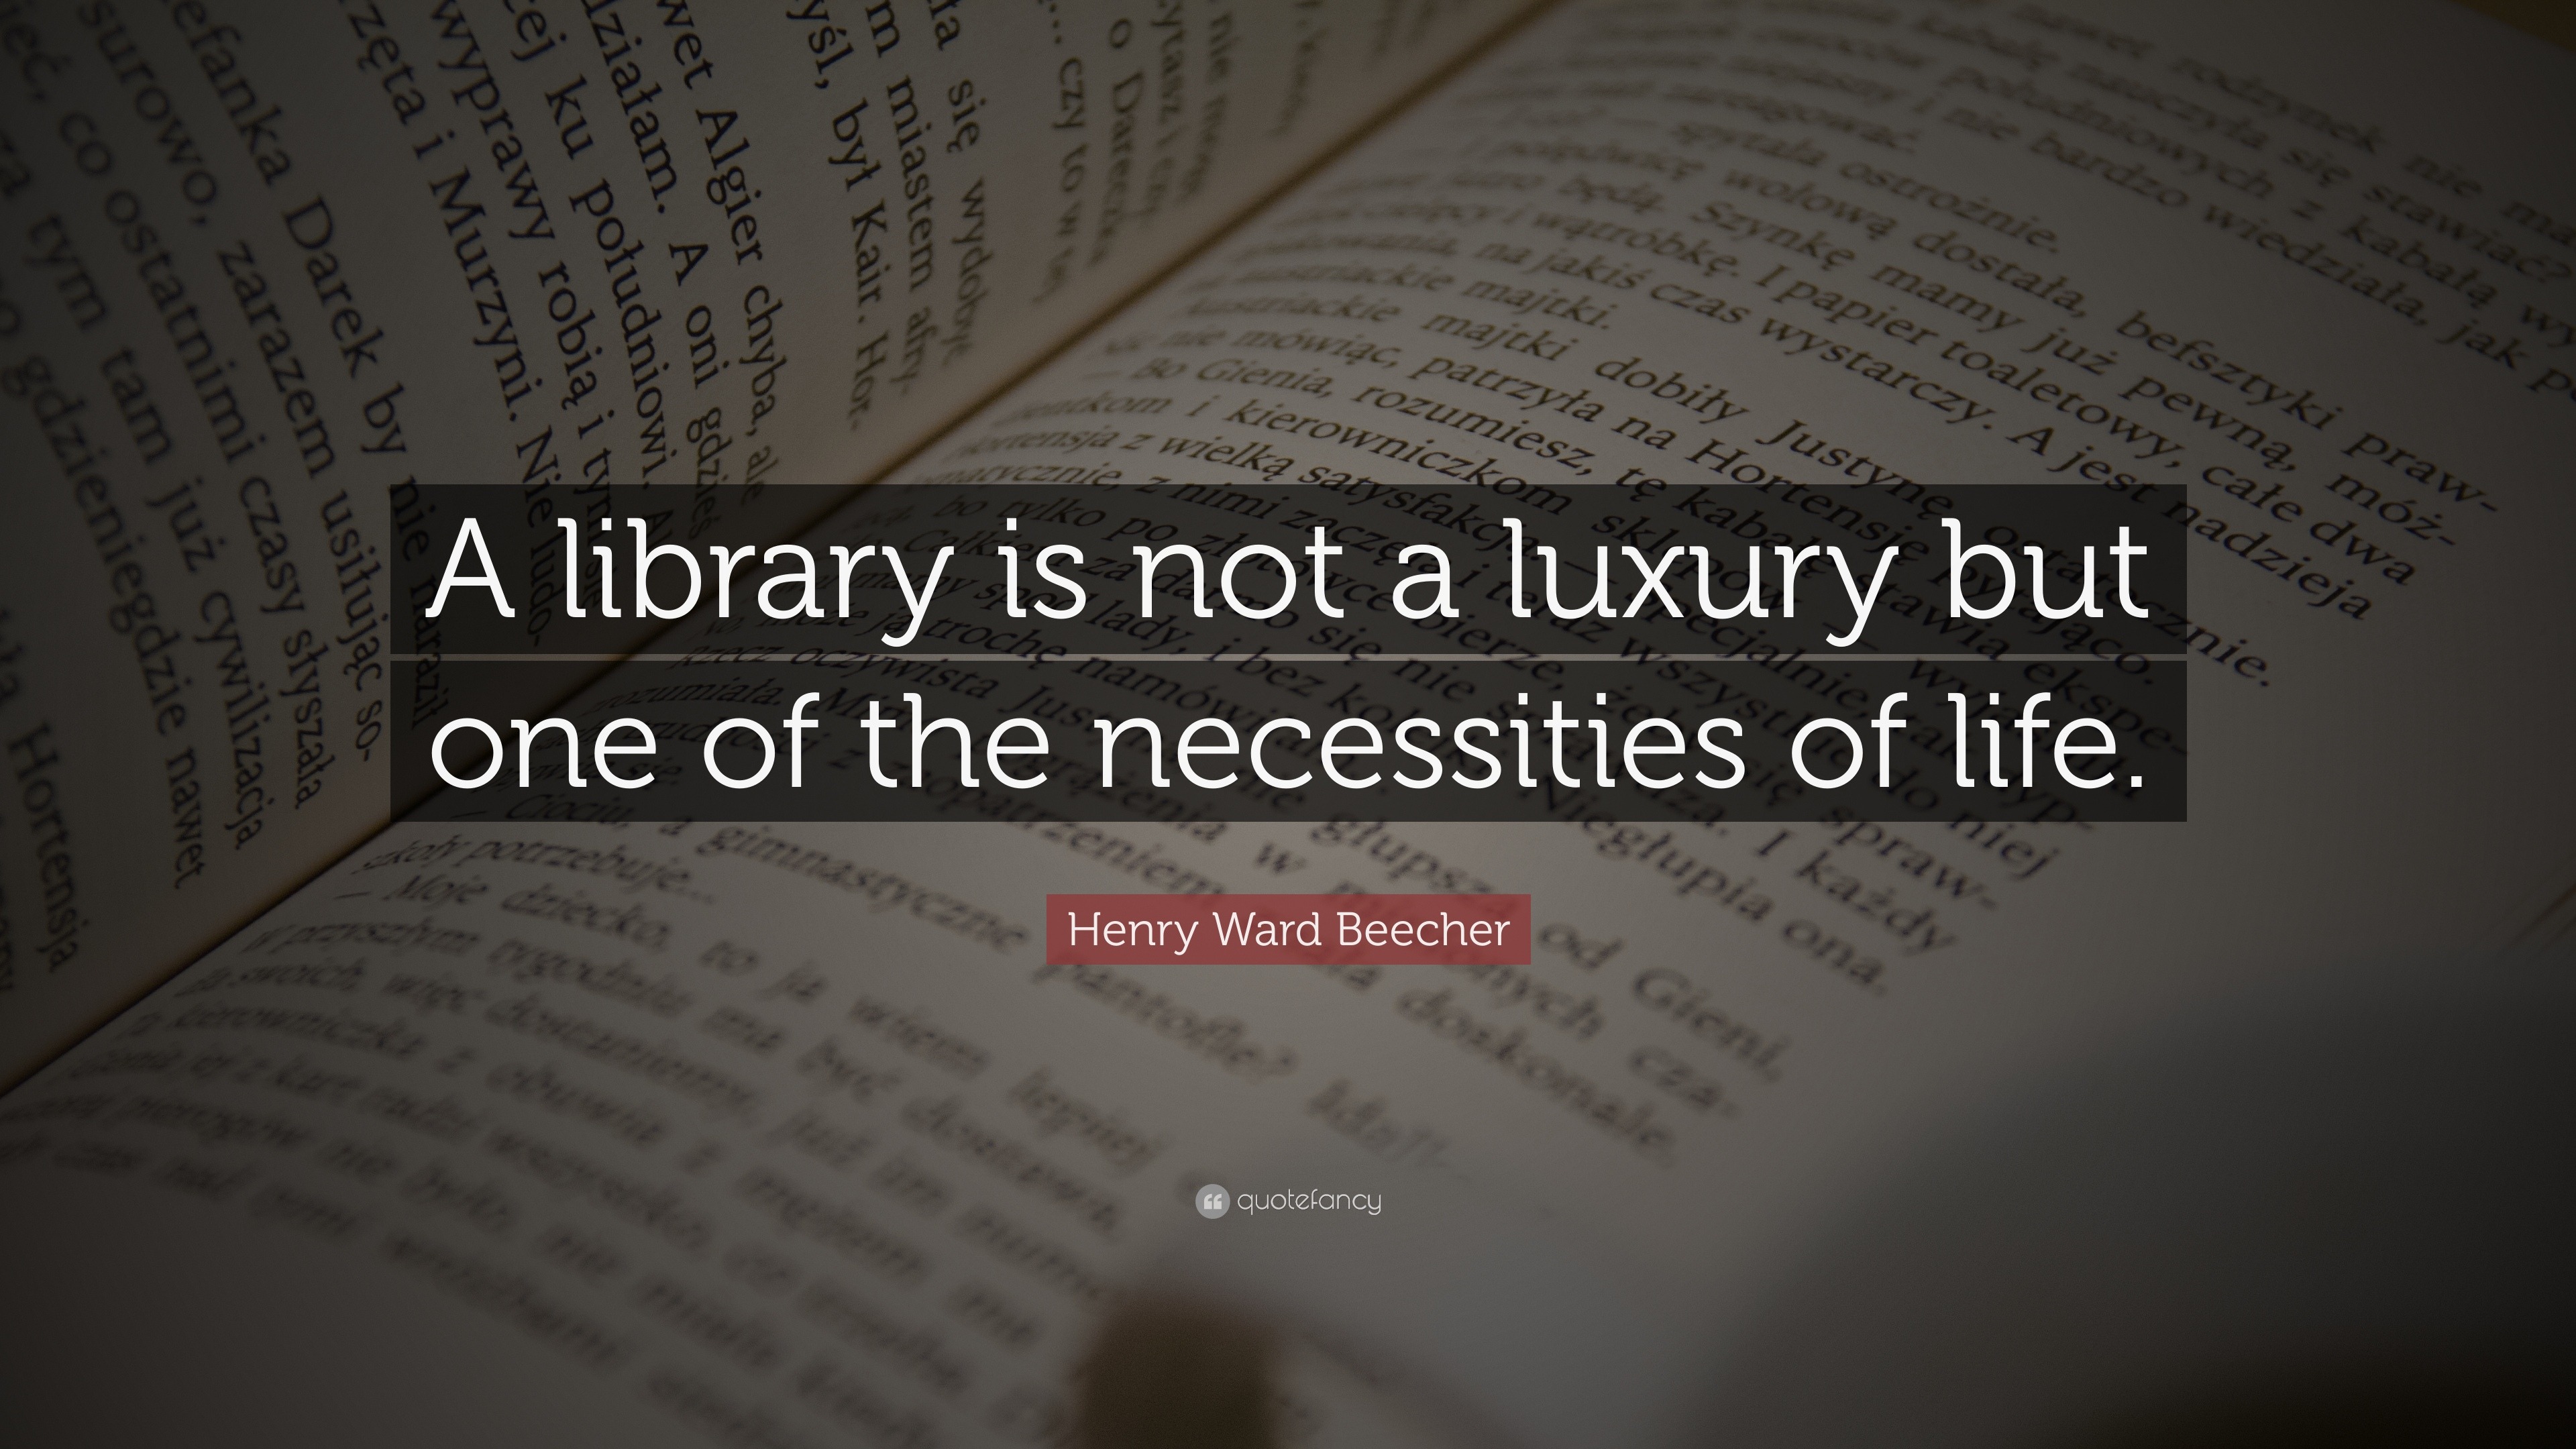 Henry Ward Beecher Quote “a Library Is Not A Luxury But One Of The Necessities Of Life ”